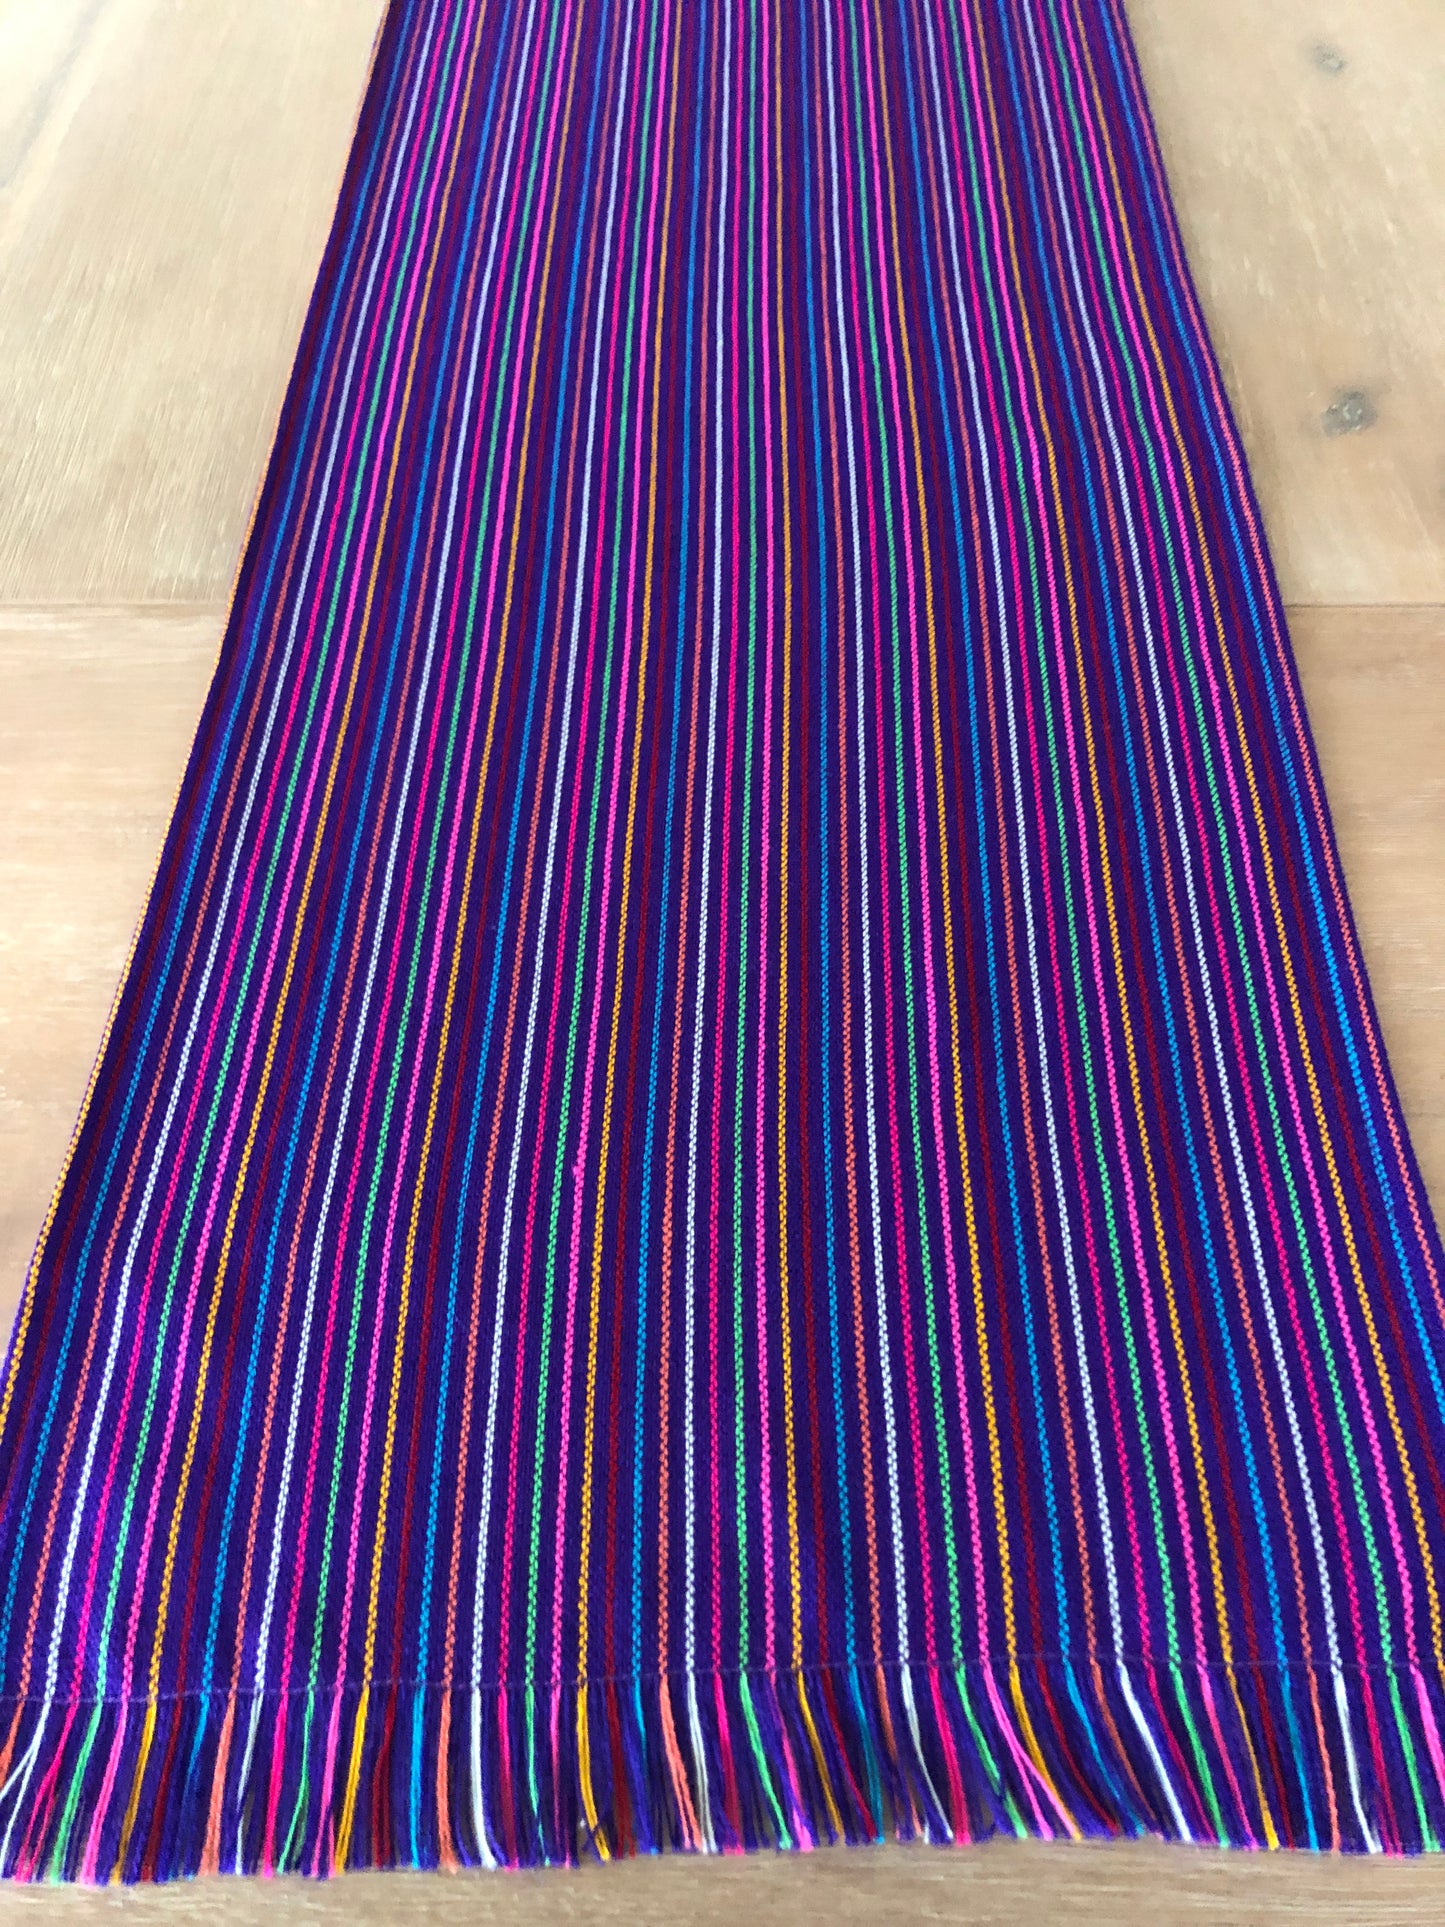 Mexican Fiesta Table Runner or Tablecloth -Purple striped